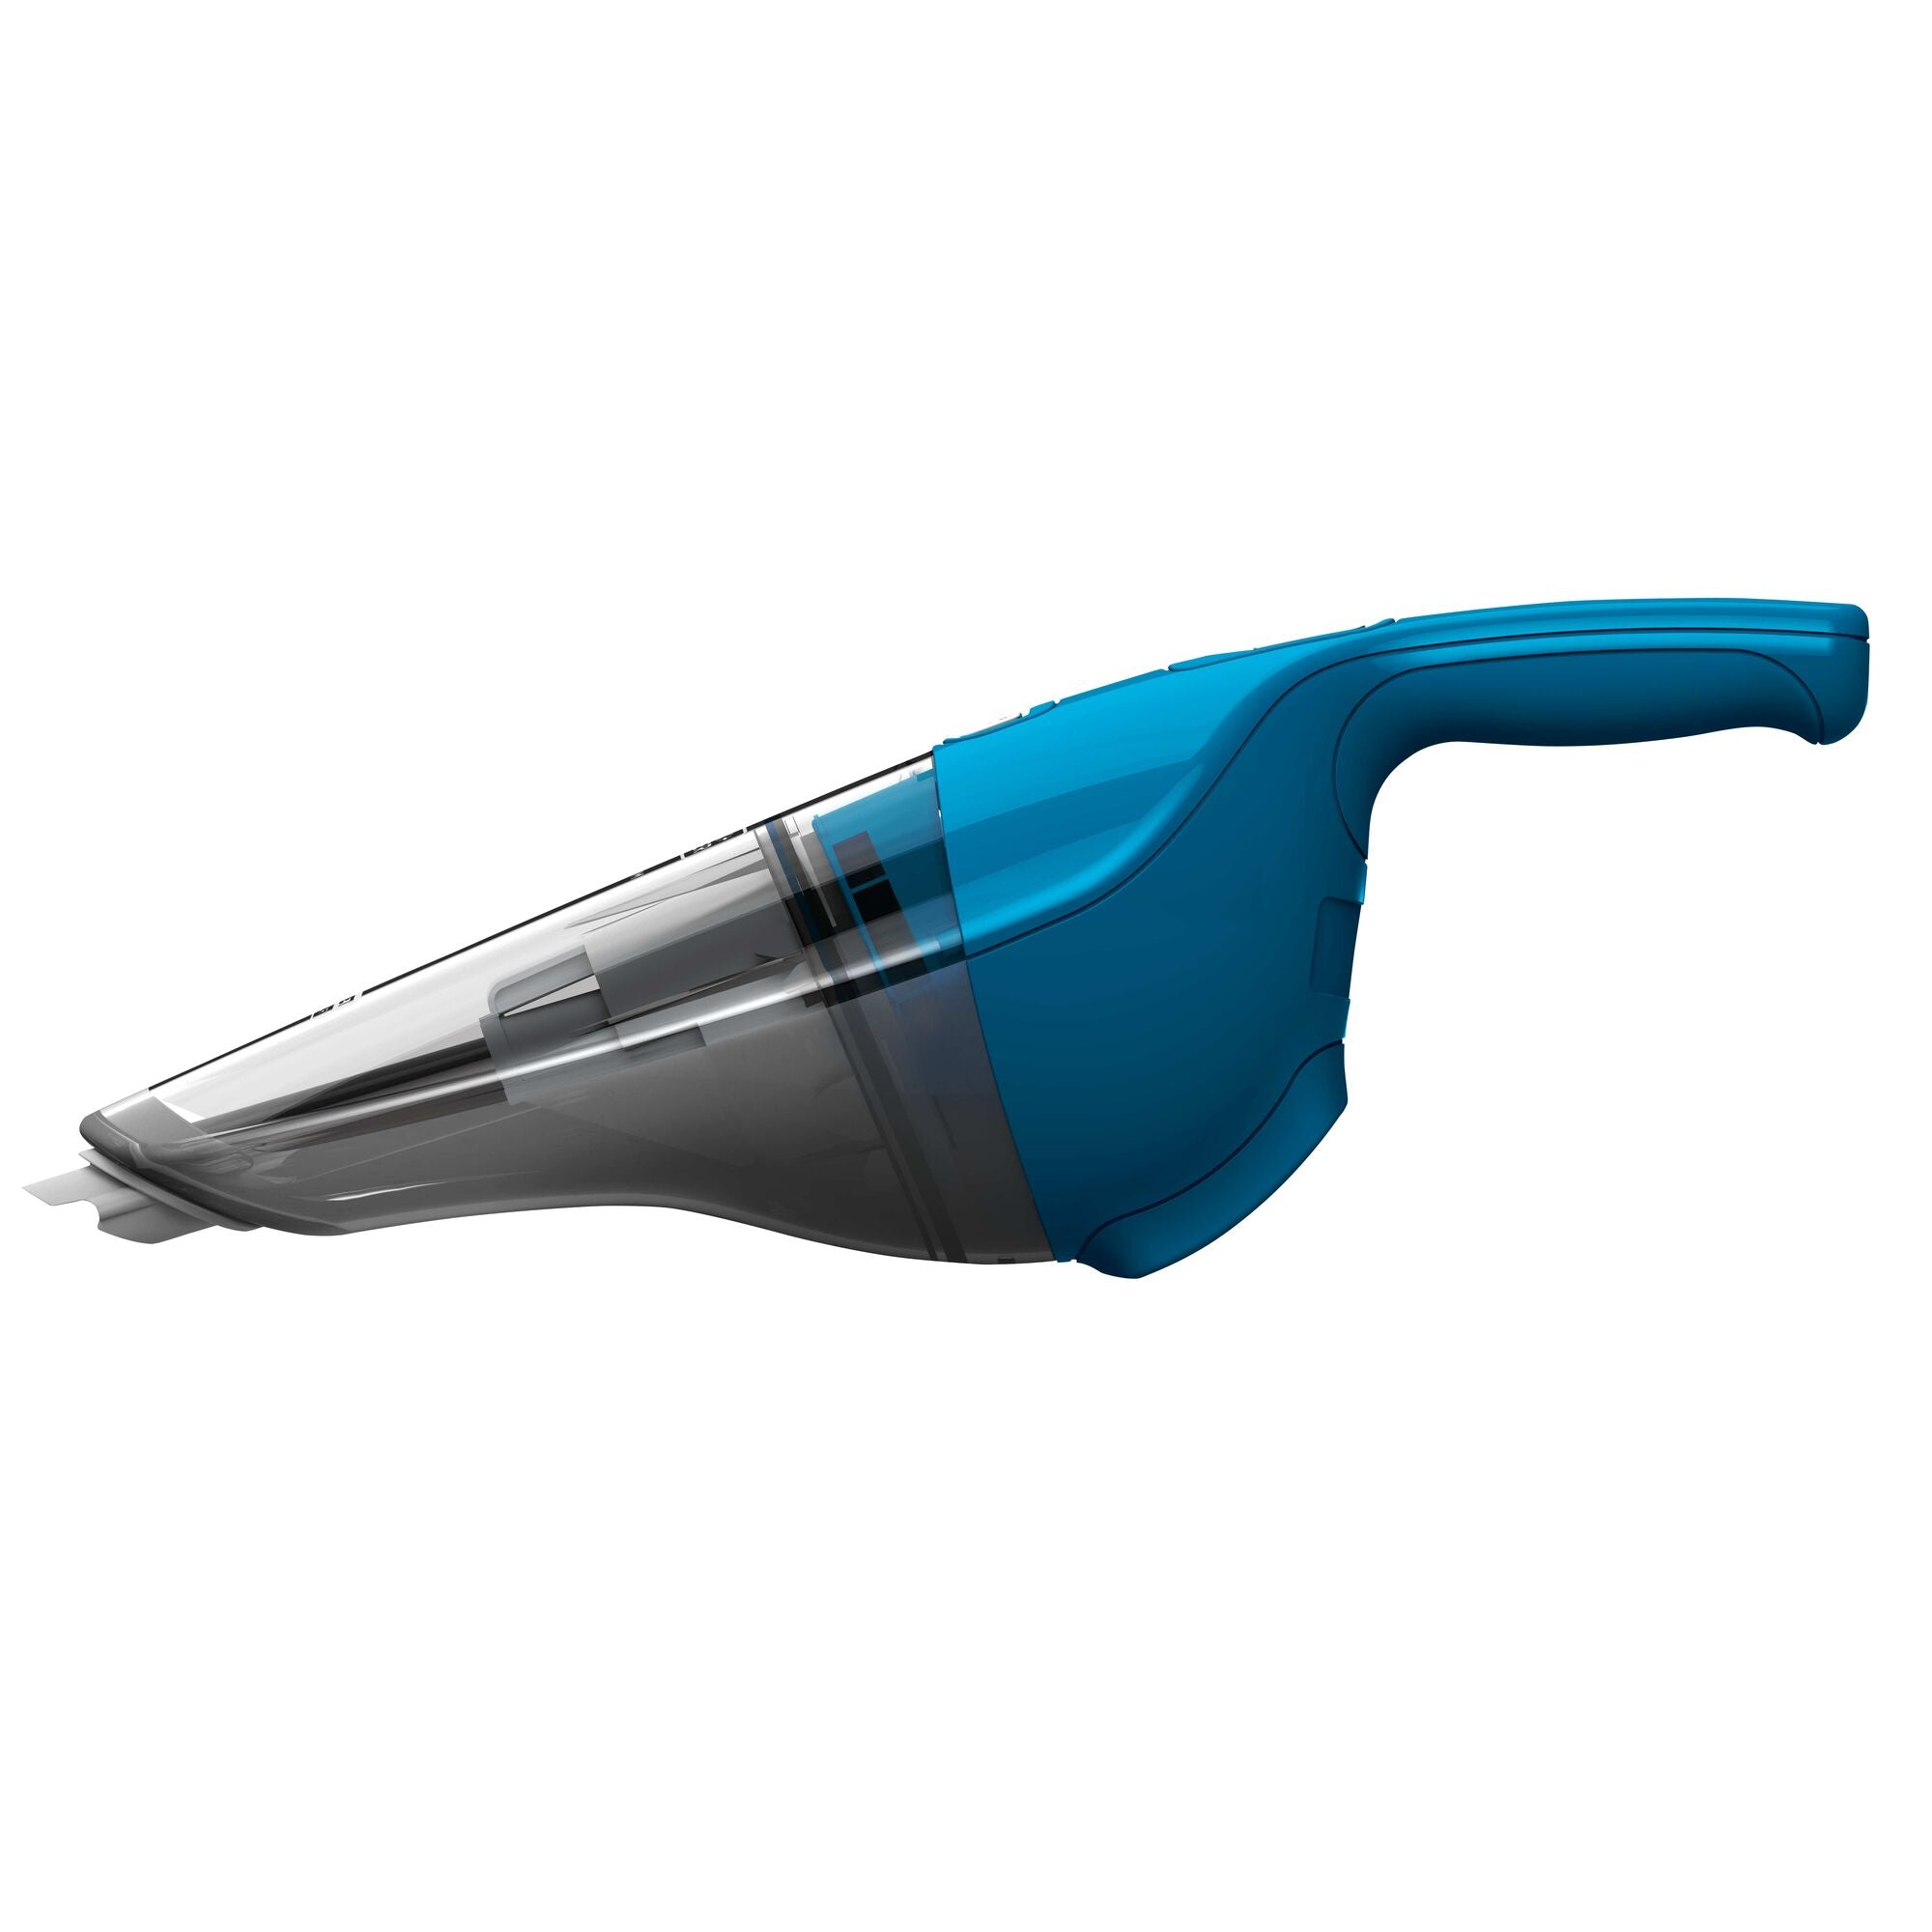 Profile of Dustbuster Quick Clean Cordless Hand Vacuum Wet / Dry.